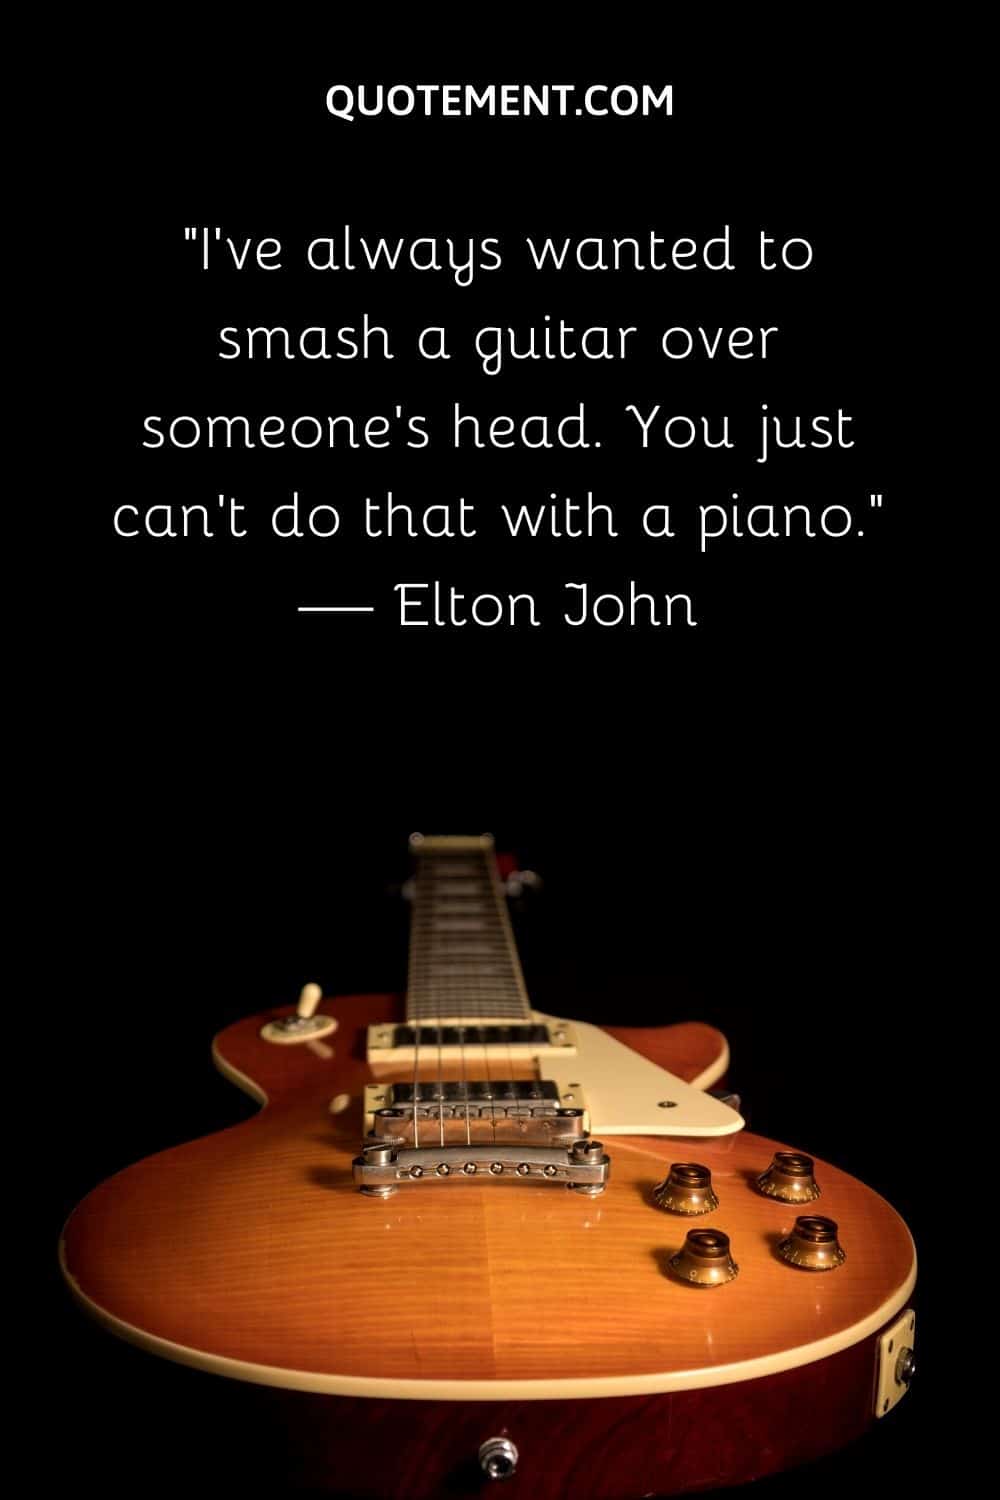 I've always wanted to smash a guitar over someone's head.